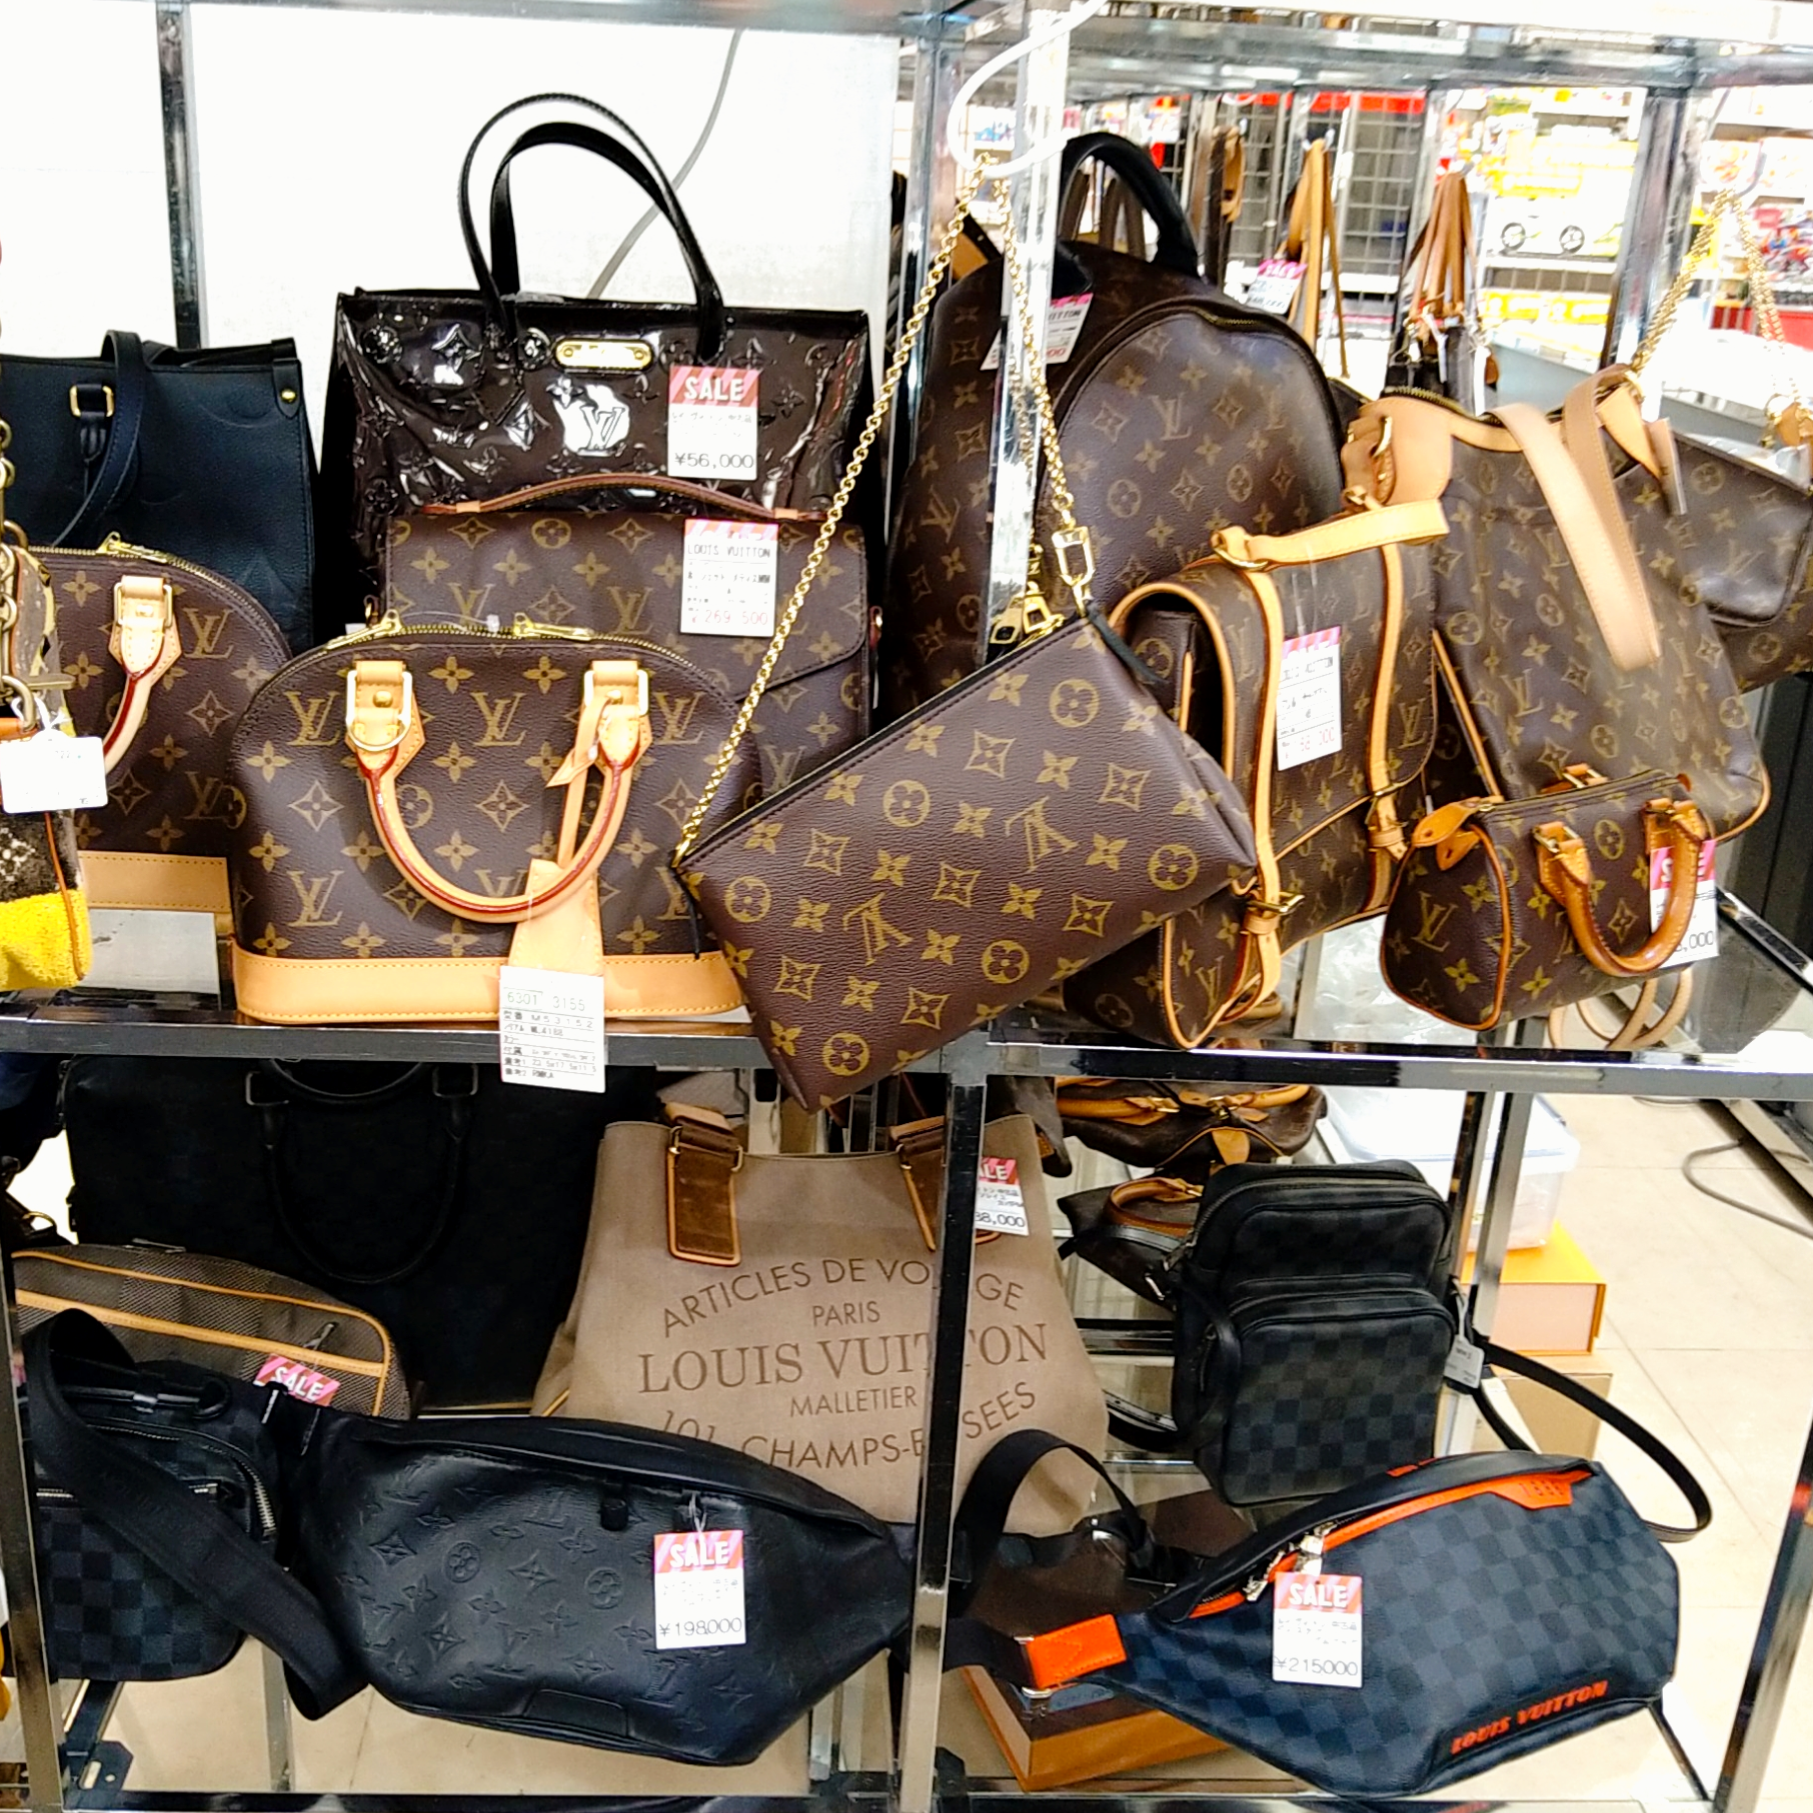 Get second-hand luxury brand items at special prices! If you're in Tokyo  during the first half of October, be sure to check out this article!